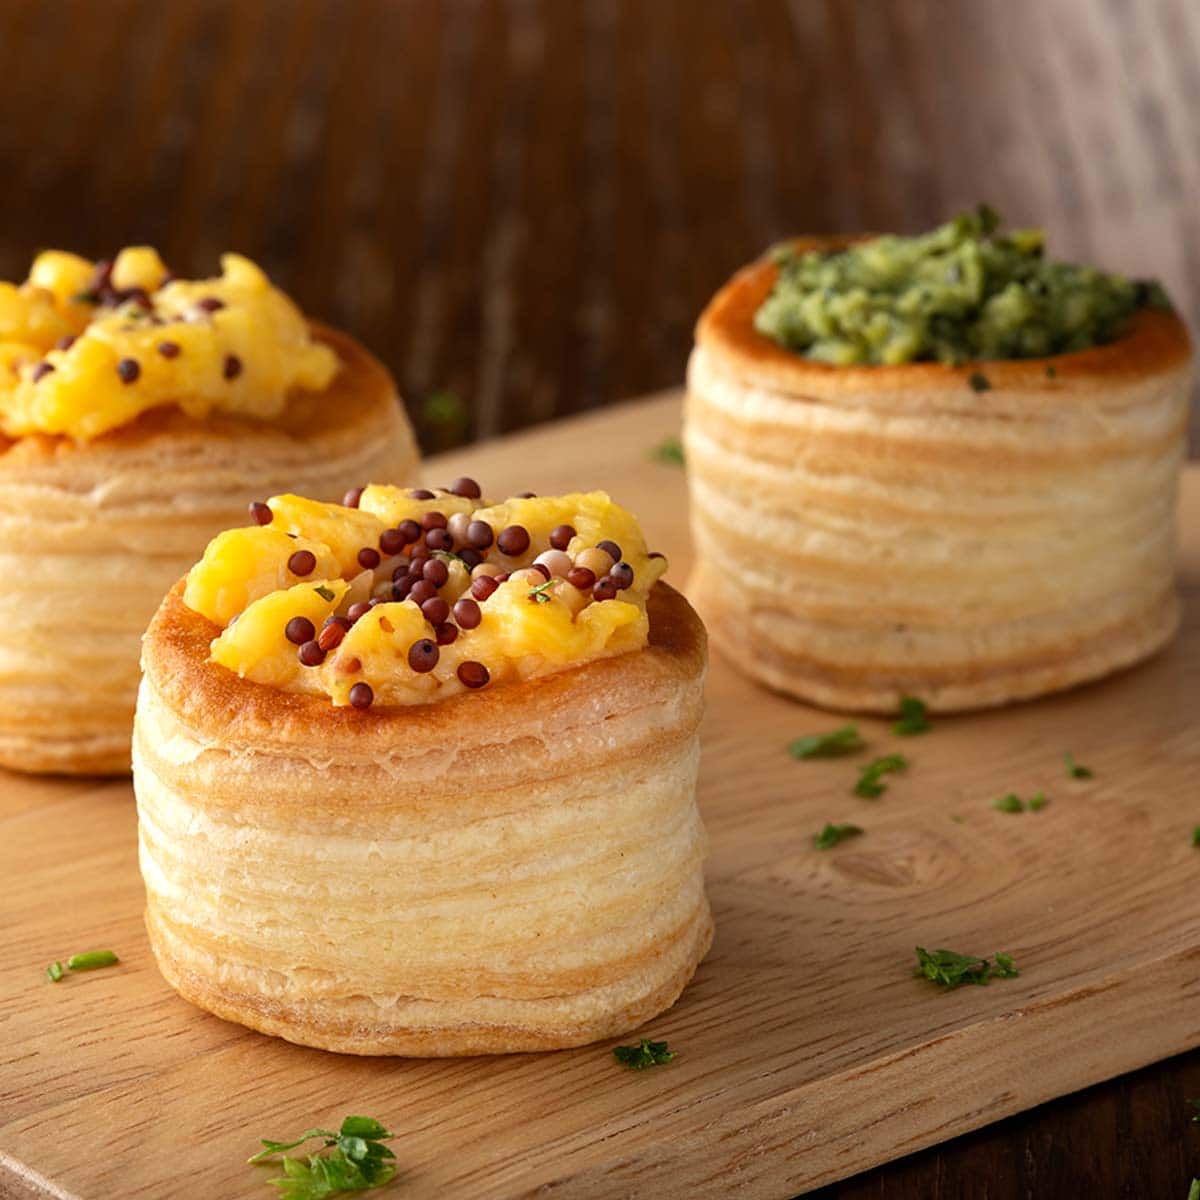 If you want to impress guests with party food, vol-au-vents are perfect. You can take most of the hard work out of making them by using store-bought puff pastry.